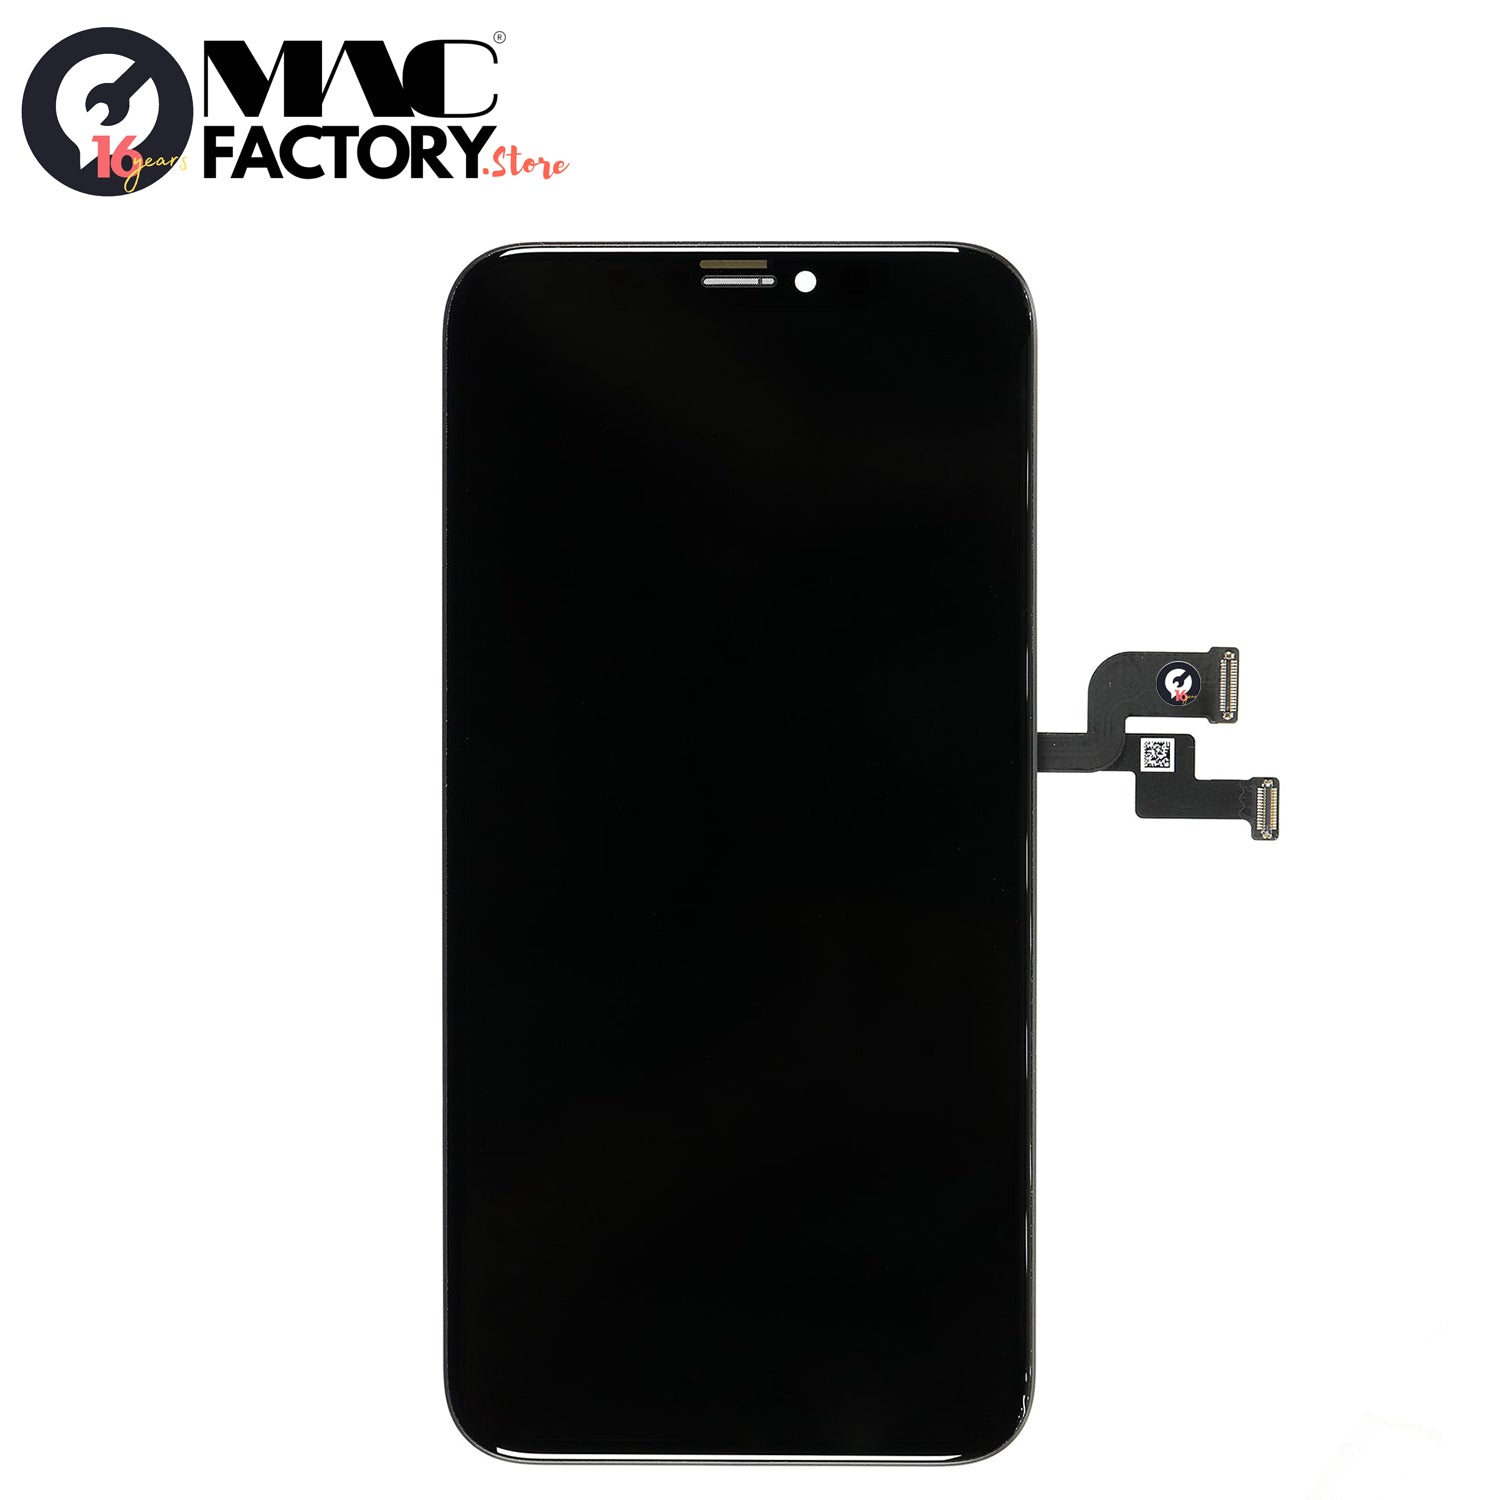 BLACK OLED SCREEN DIGITIZER ASSEMBLY FOR IPHONE XS